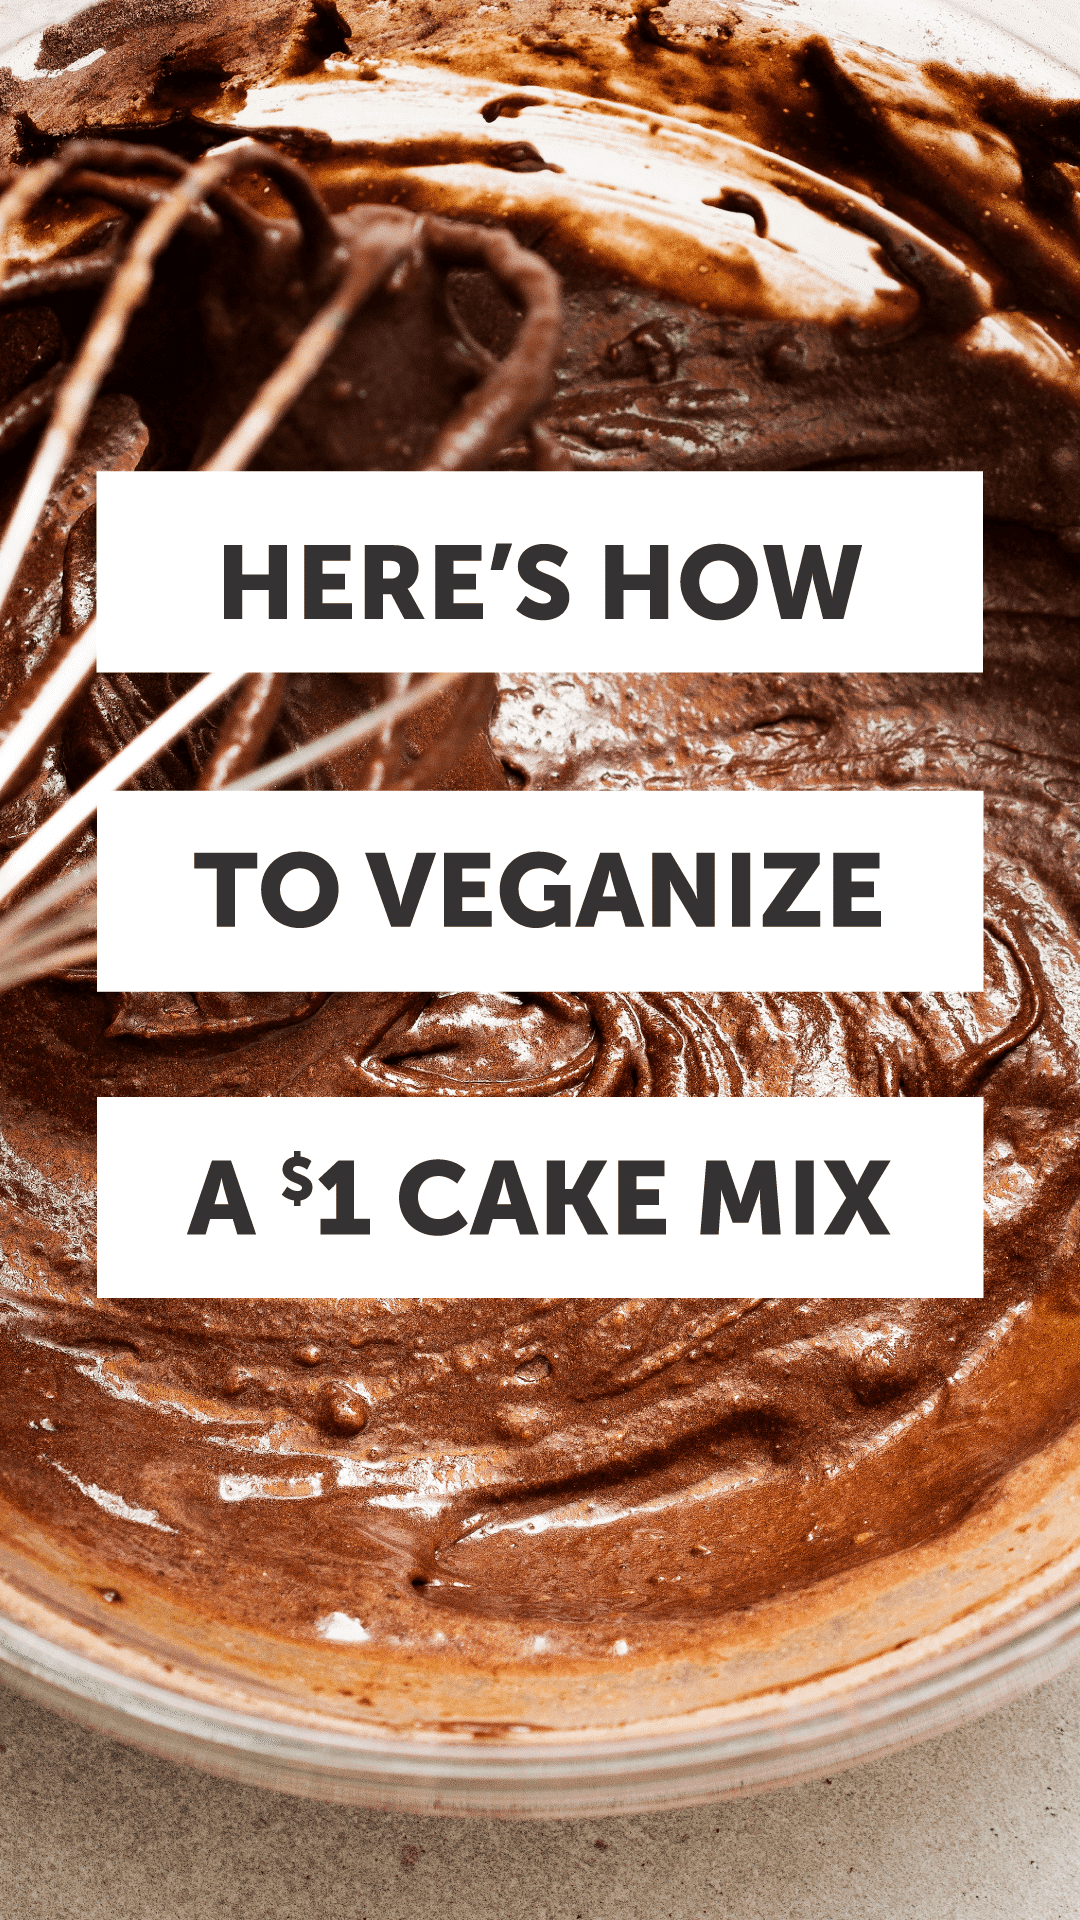 Here’s How to Veganize a $1 Boxed Cake Mix